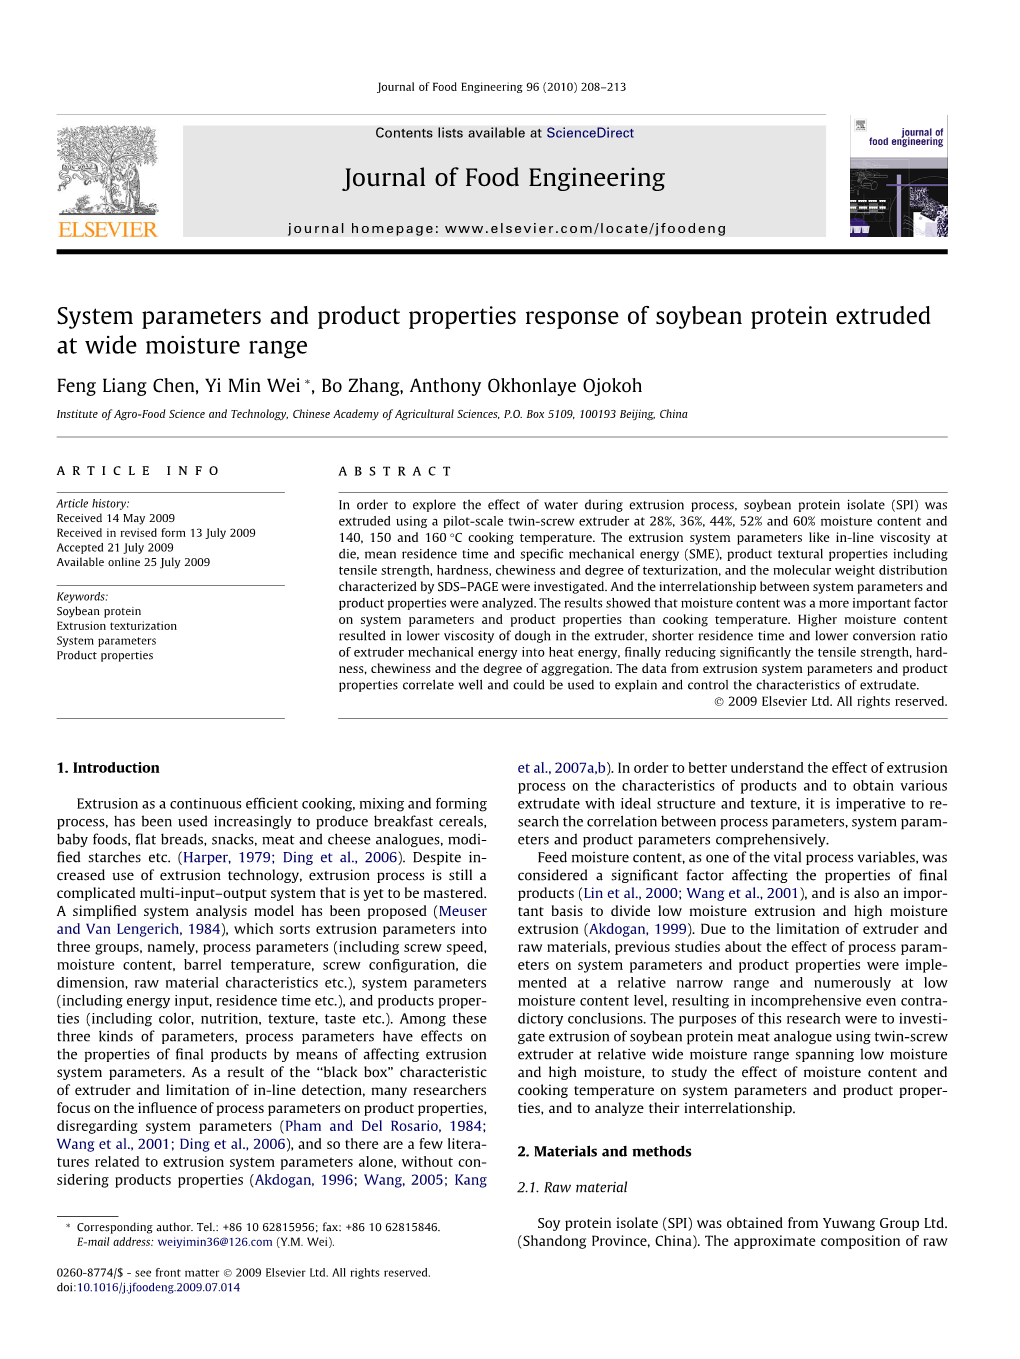 System Parameters and Product Properties Response of Soybean Protein Extruded at Wide Moisture Range